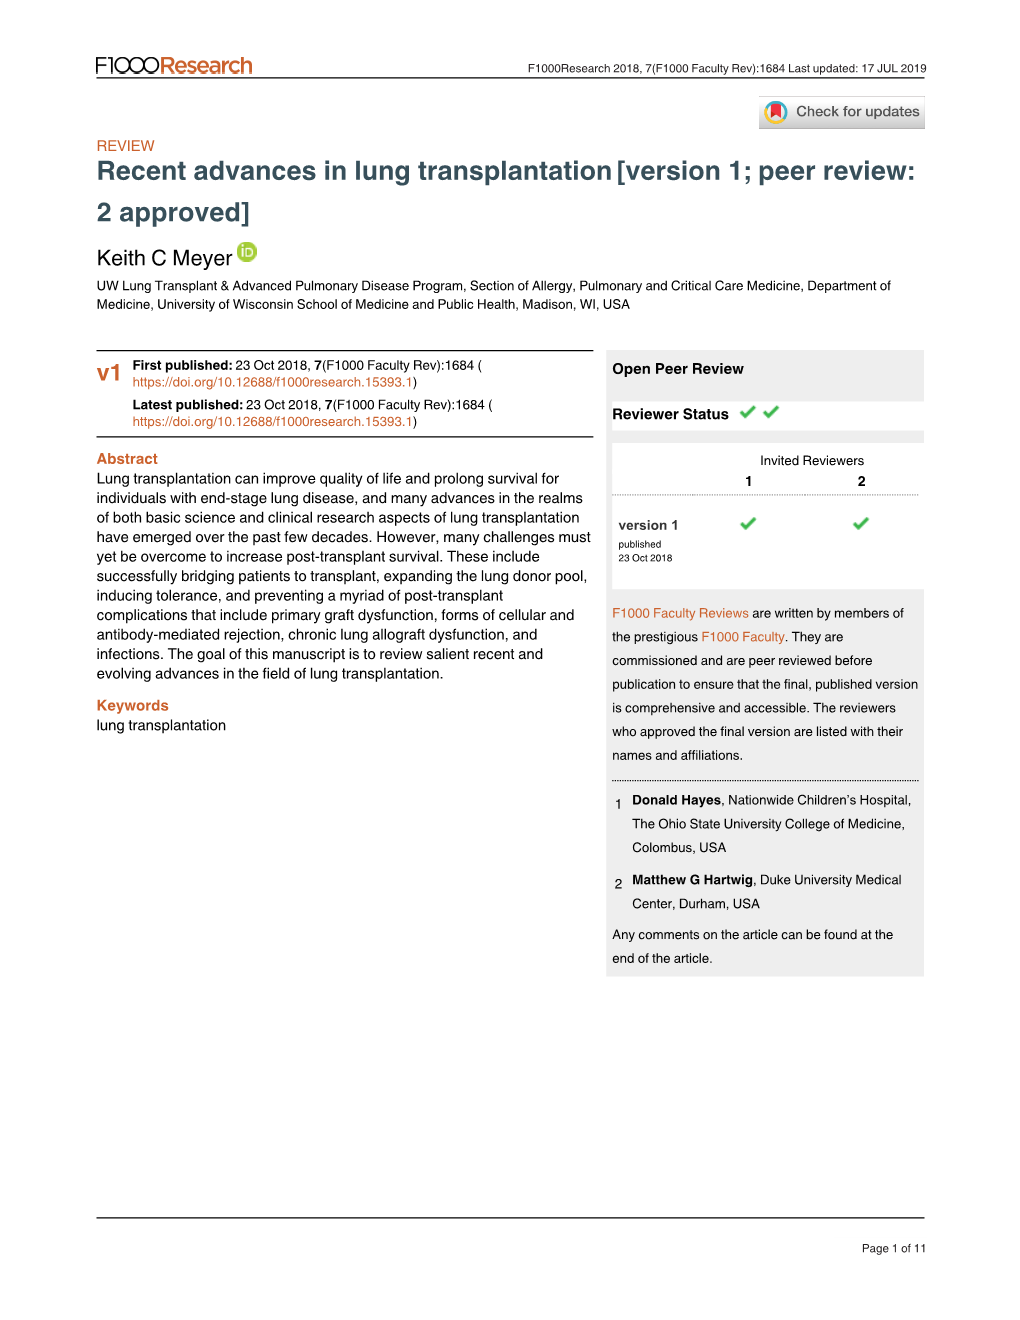 Recent Advances in Lung Transplantation[Version 1; Peer Review: 2 Approved]